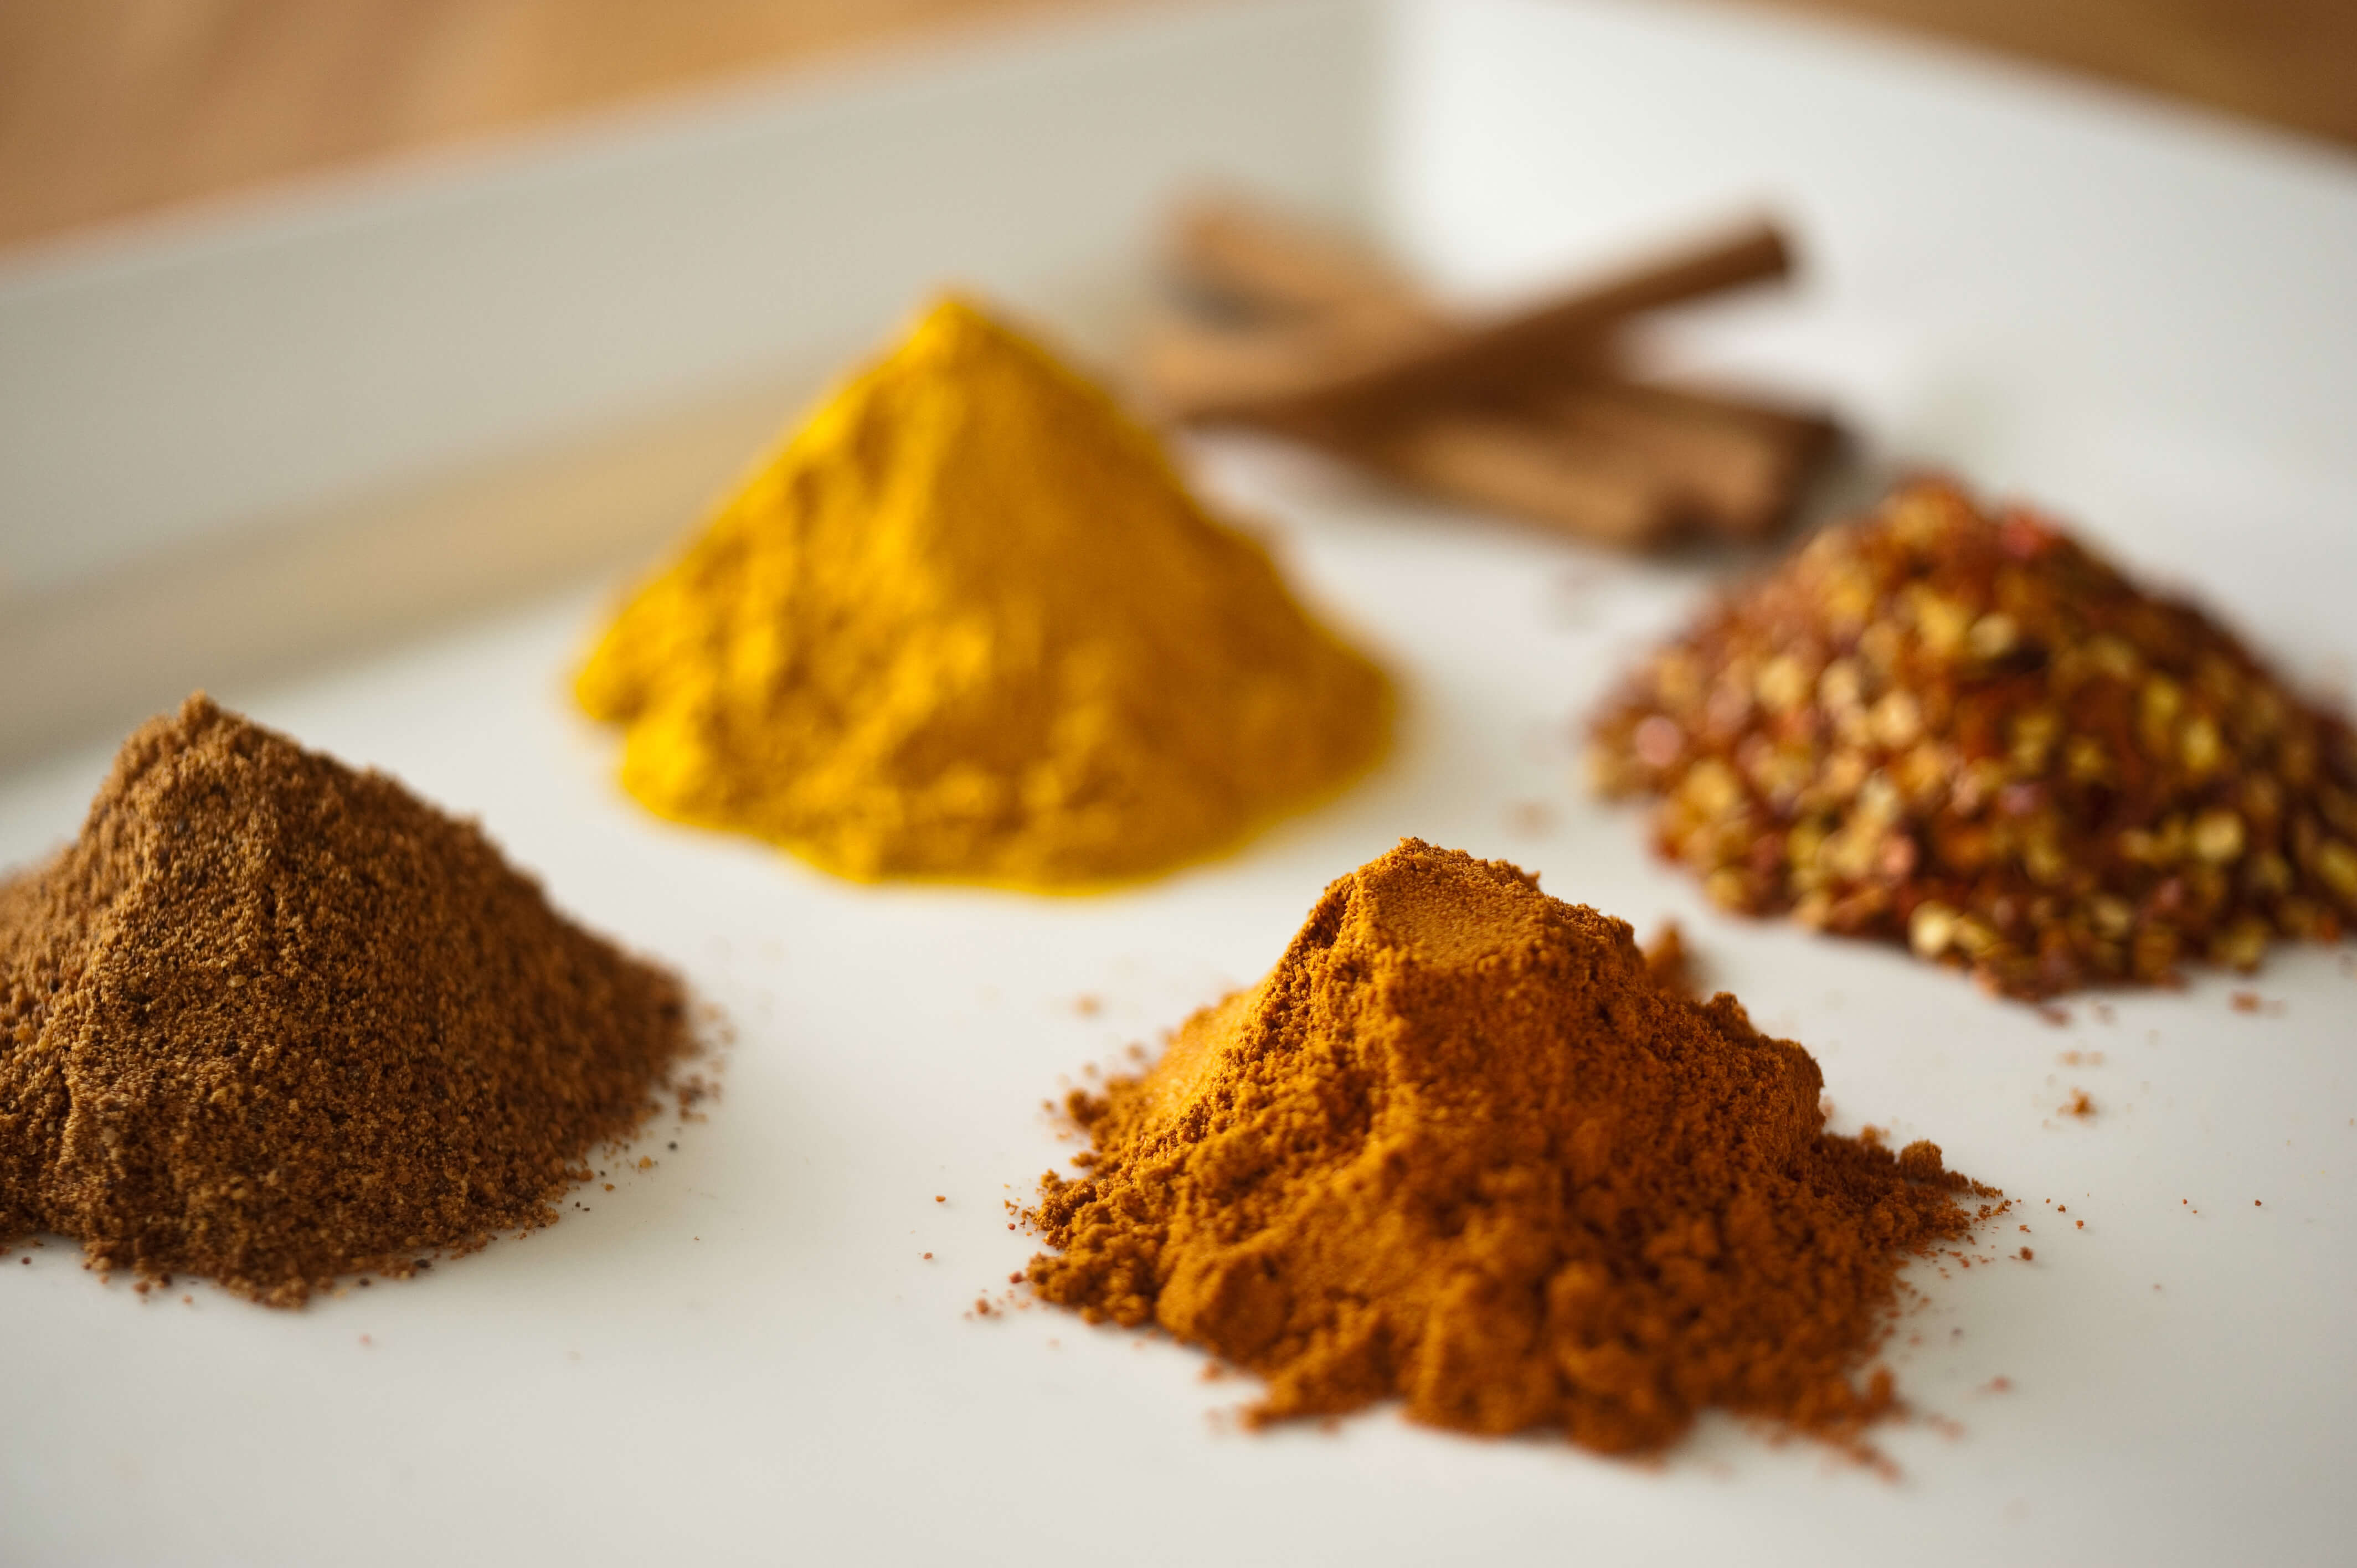 How To Make Your Own Spice Blends